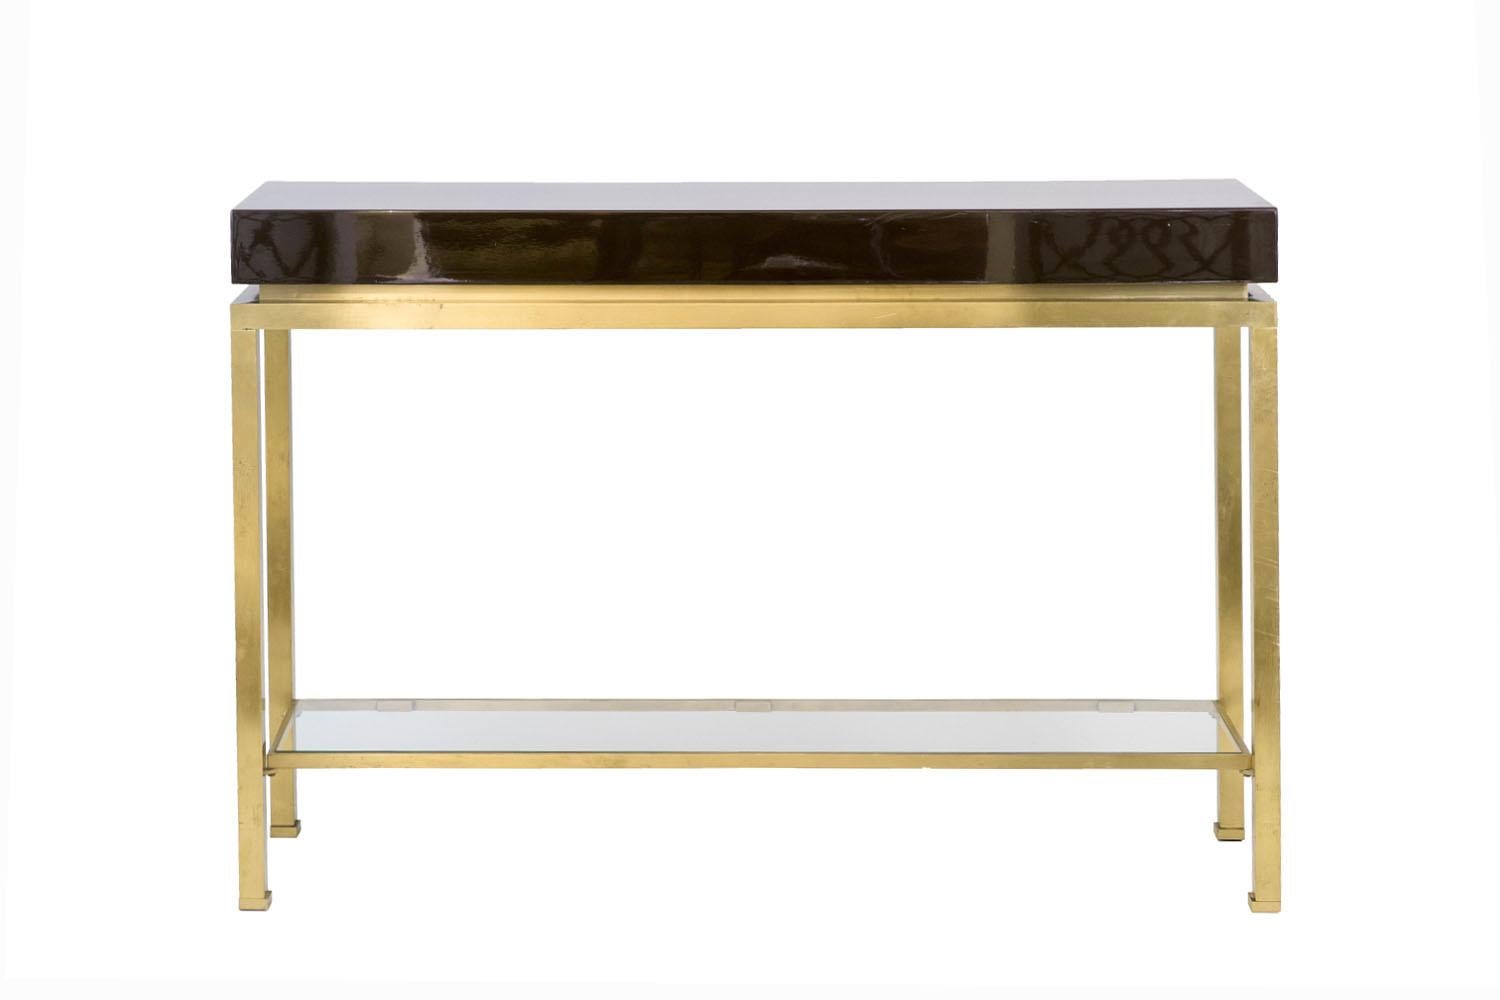 French Guy Lefèvre for Maison Jansen, Lacquer and Brass Console, 1970s